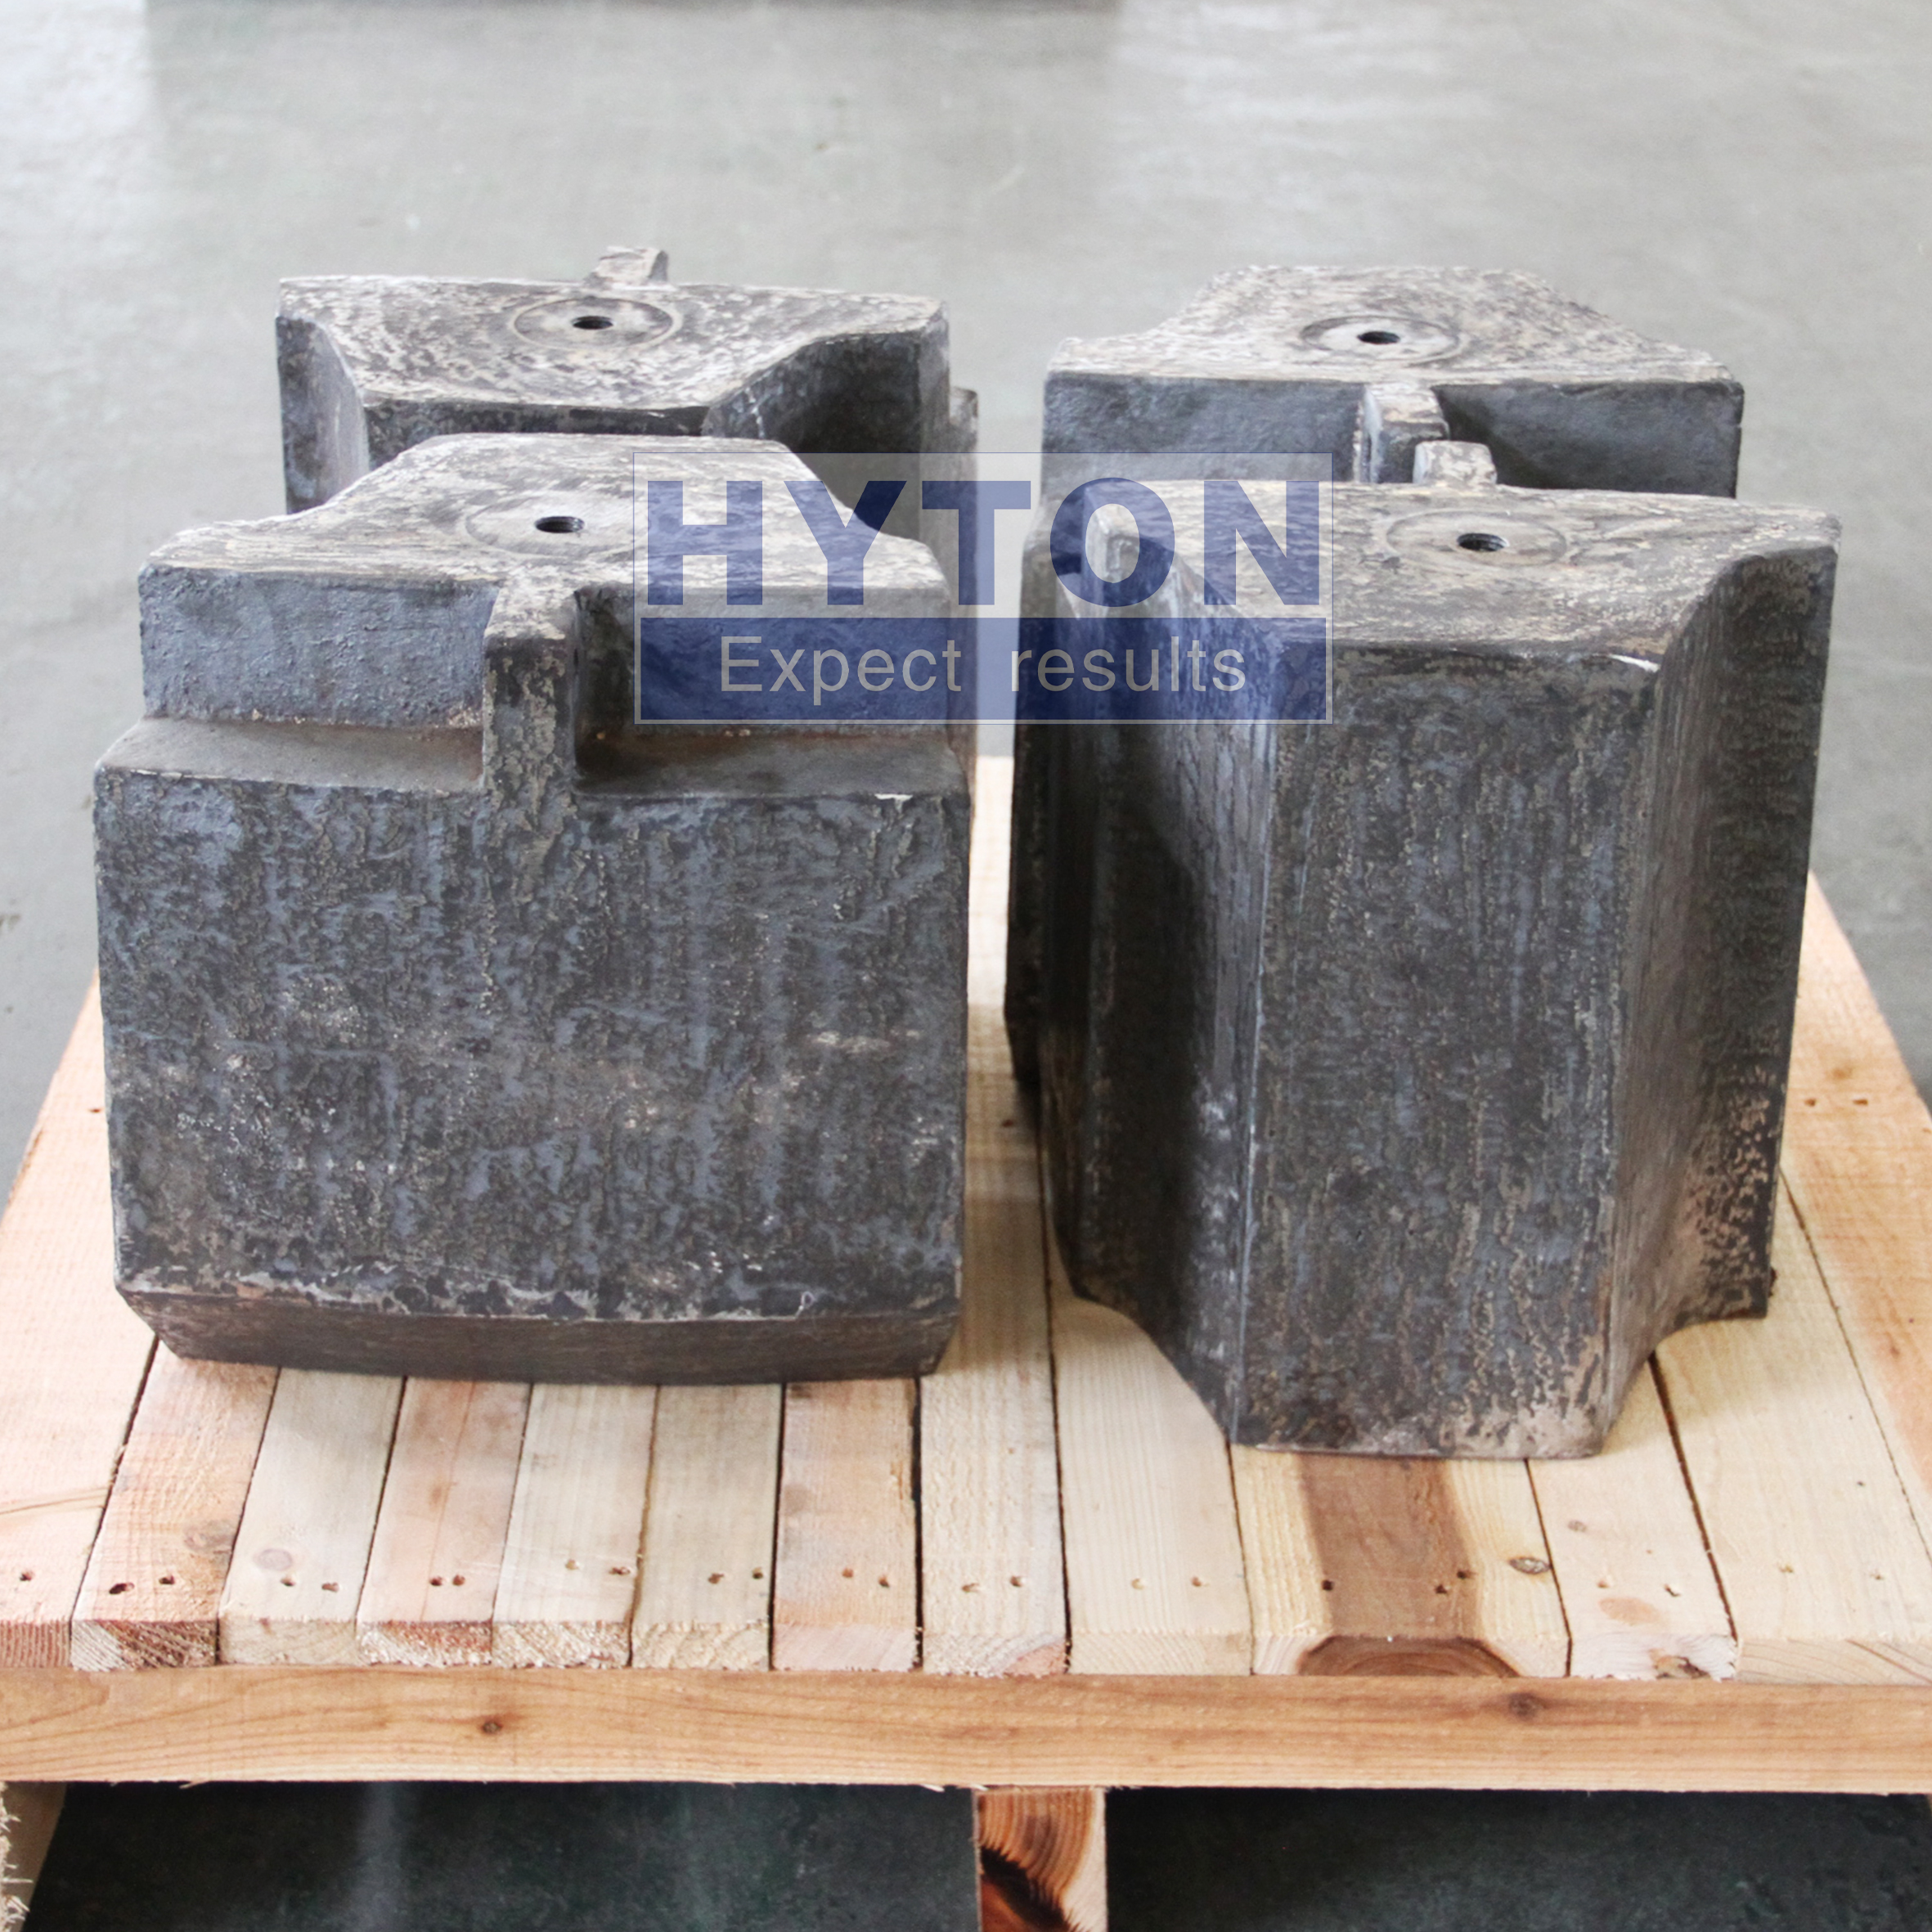 Suit to Trio TV95 VSI Crusher High Chrome Wear Parts Anvils 